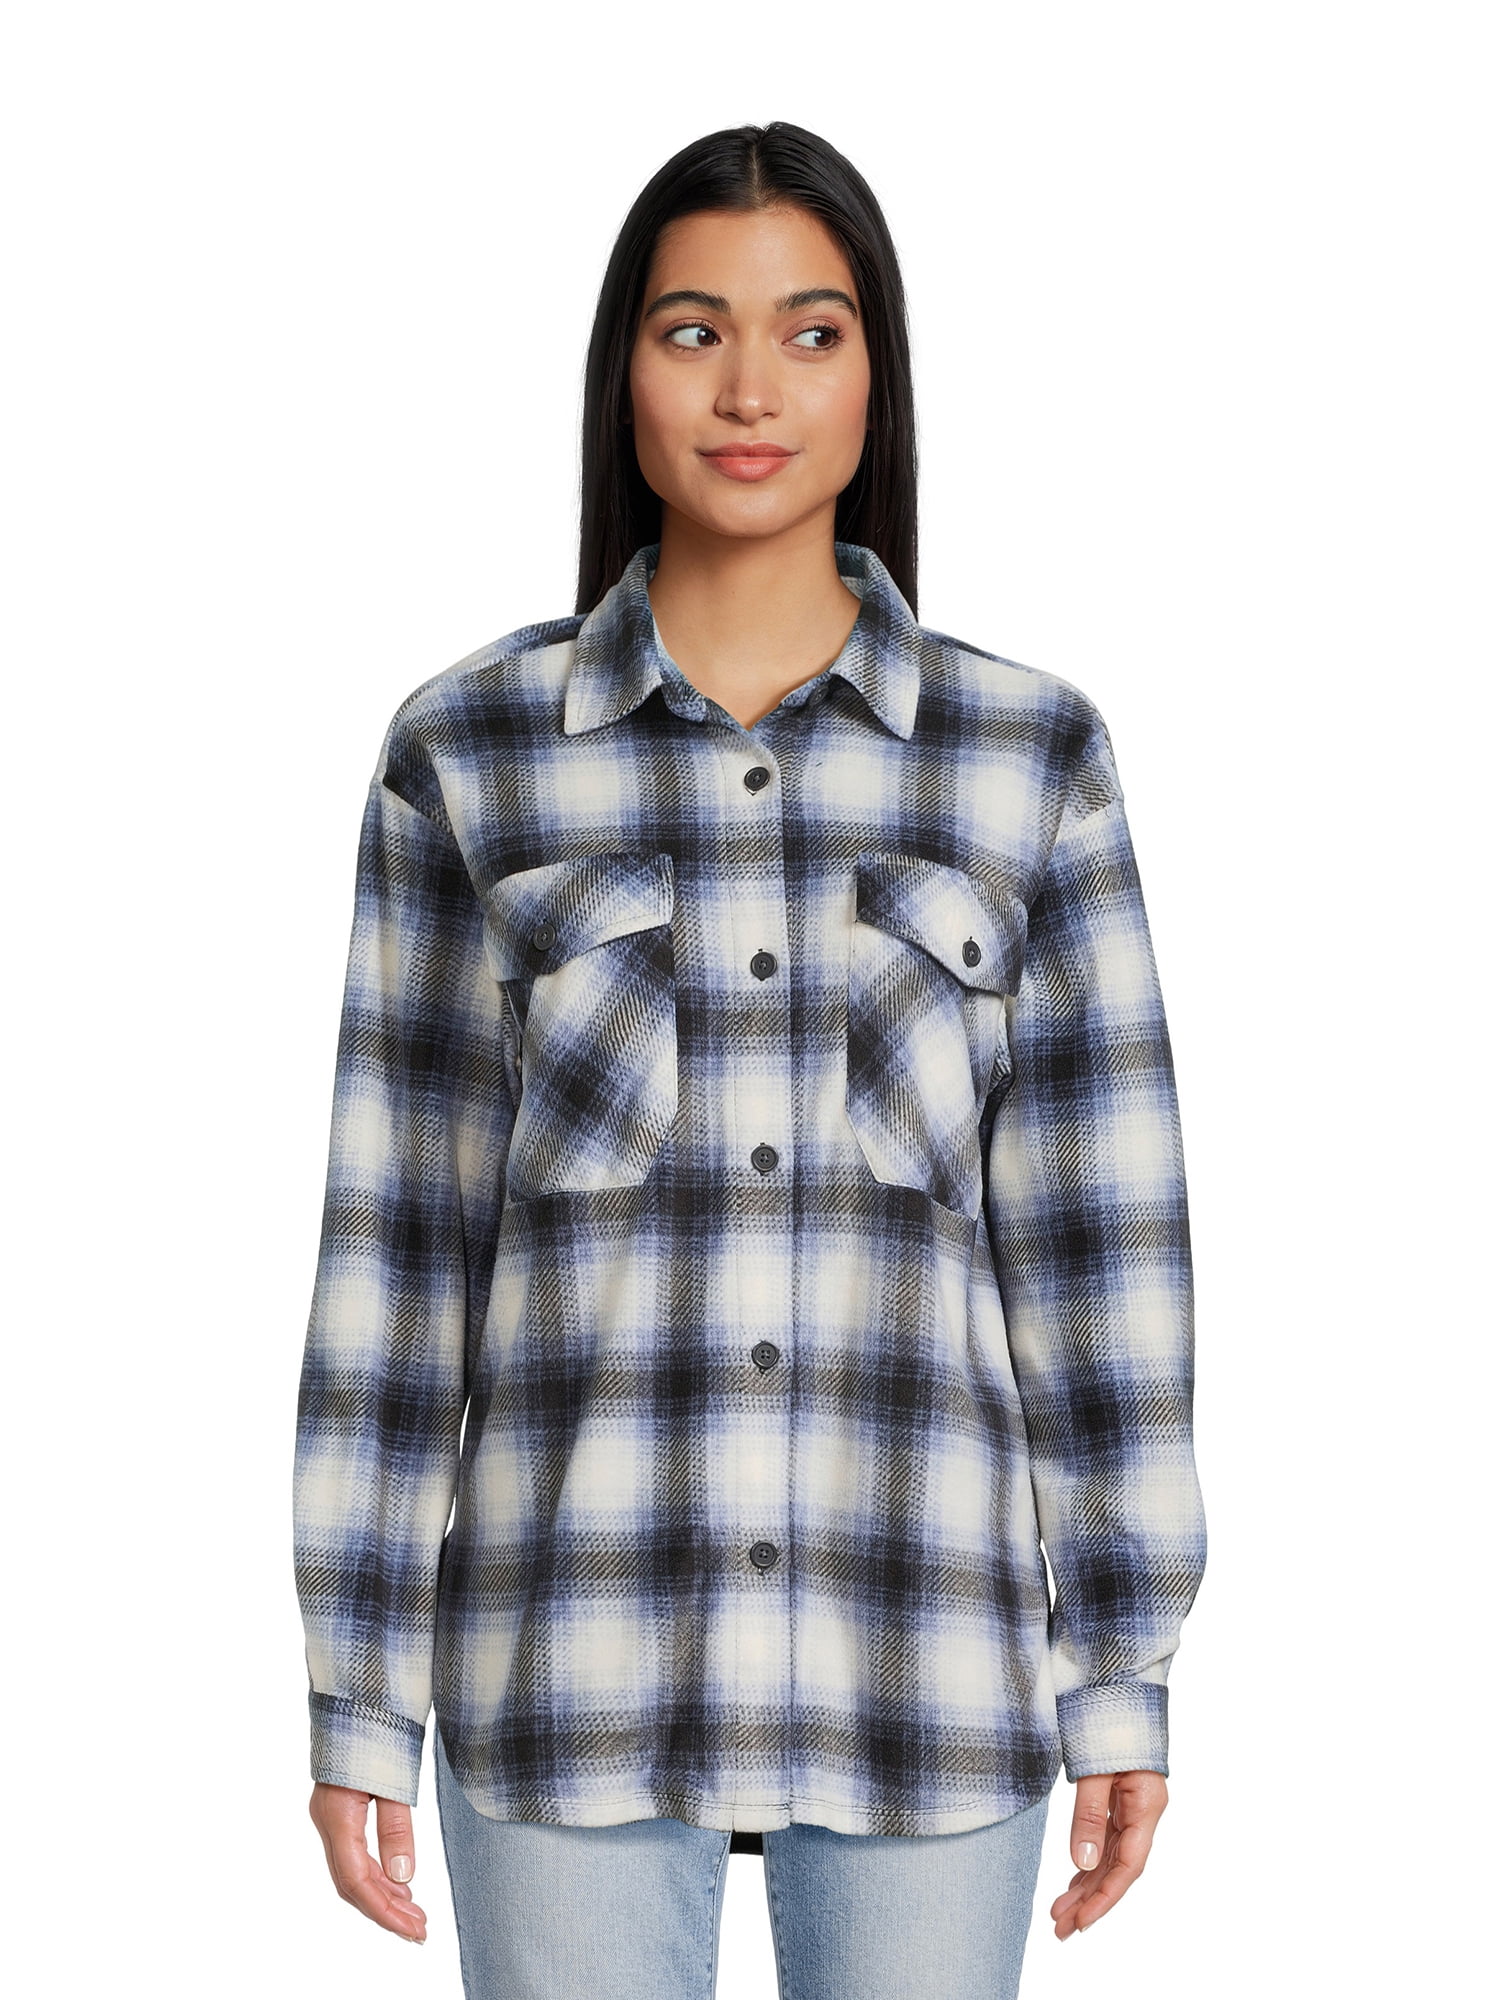 Just Polly Junior’s Plaid Top with Long Sleeves, Sizes S-XL - Walmart.com